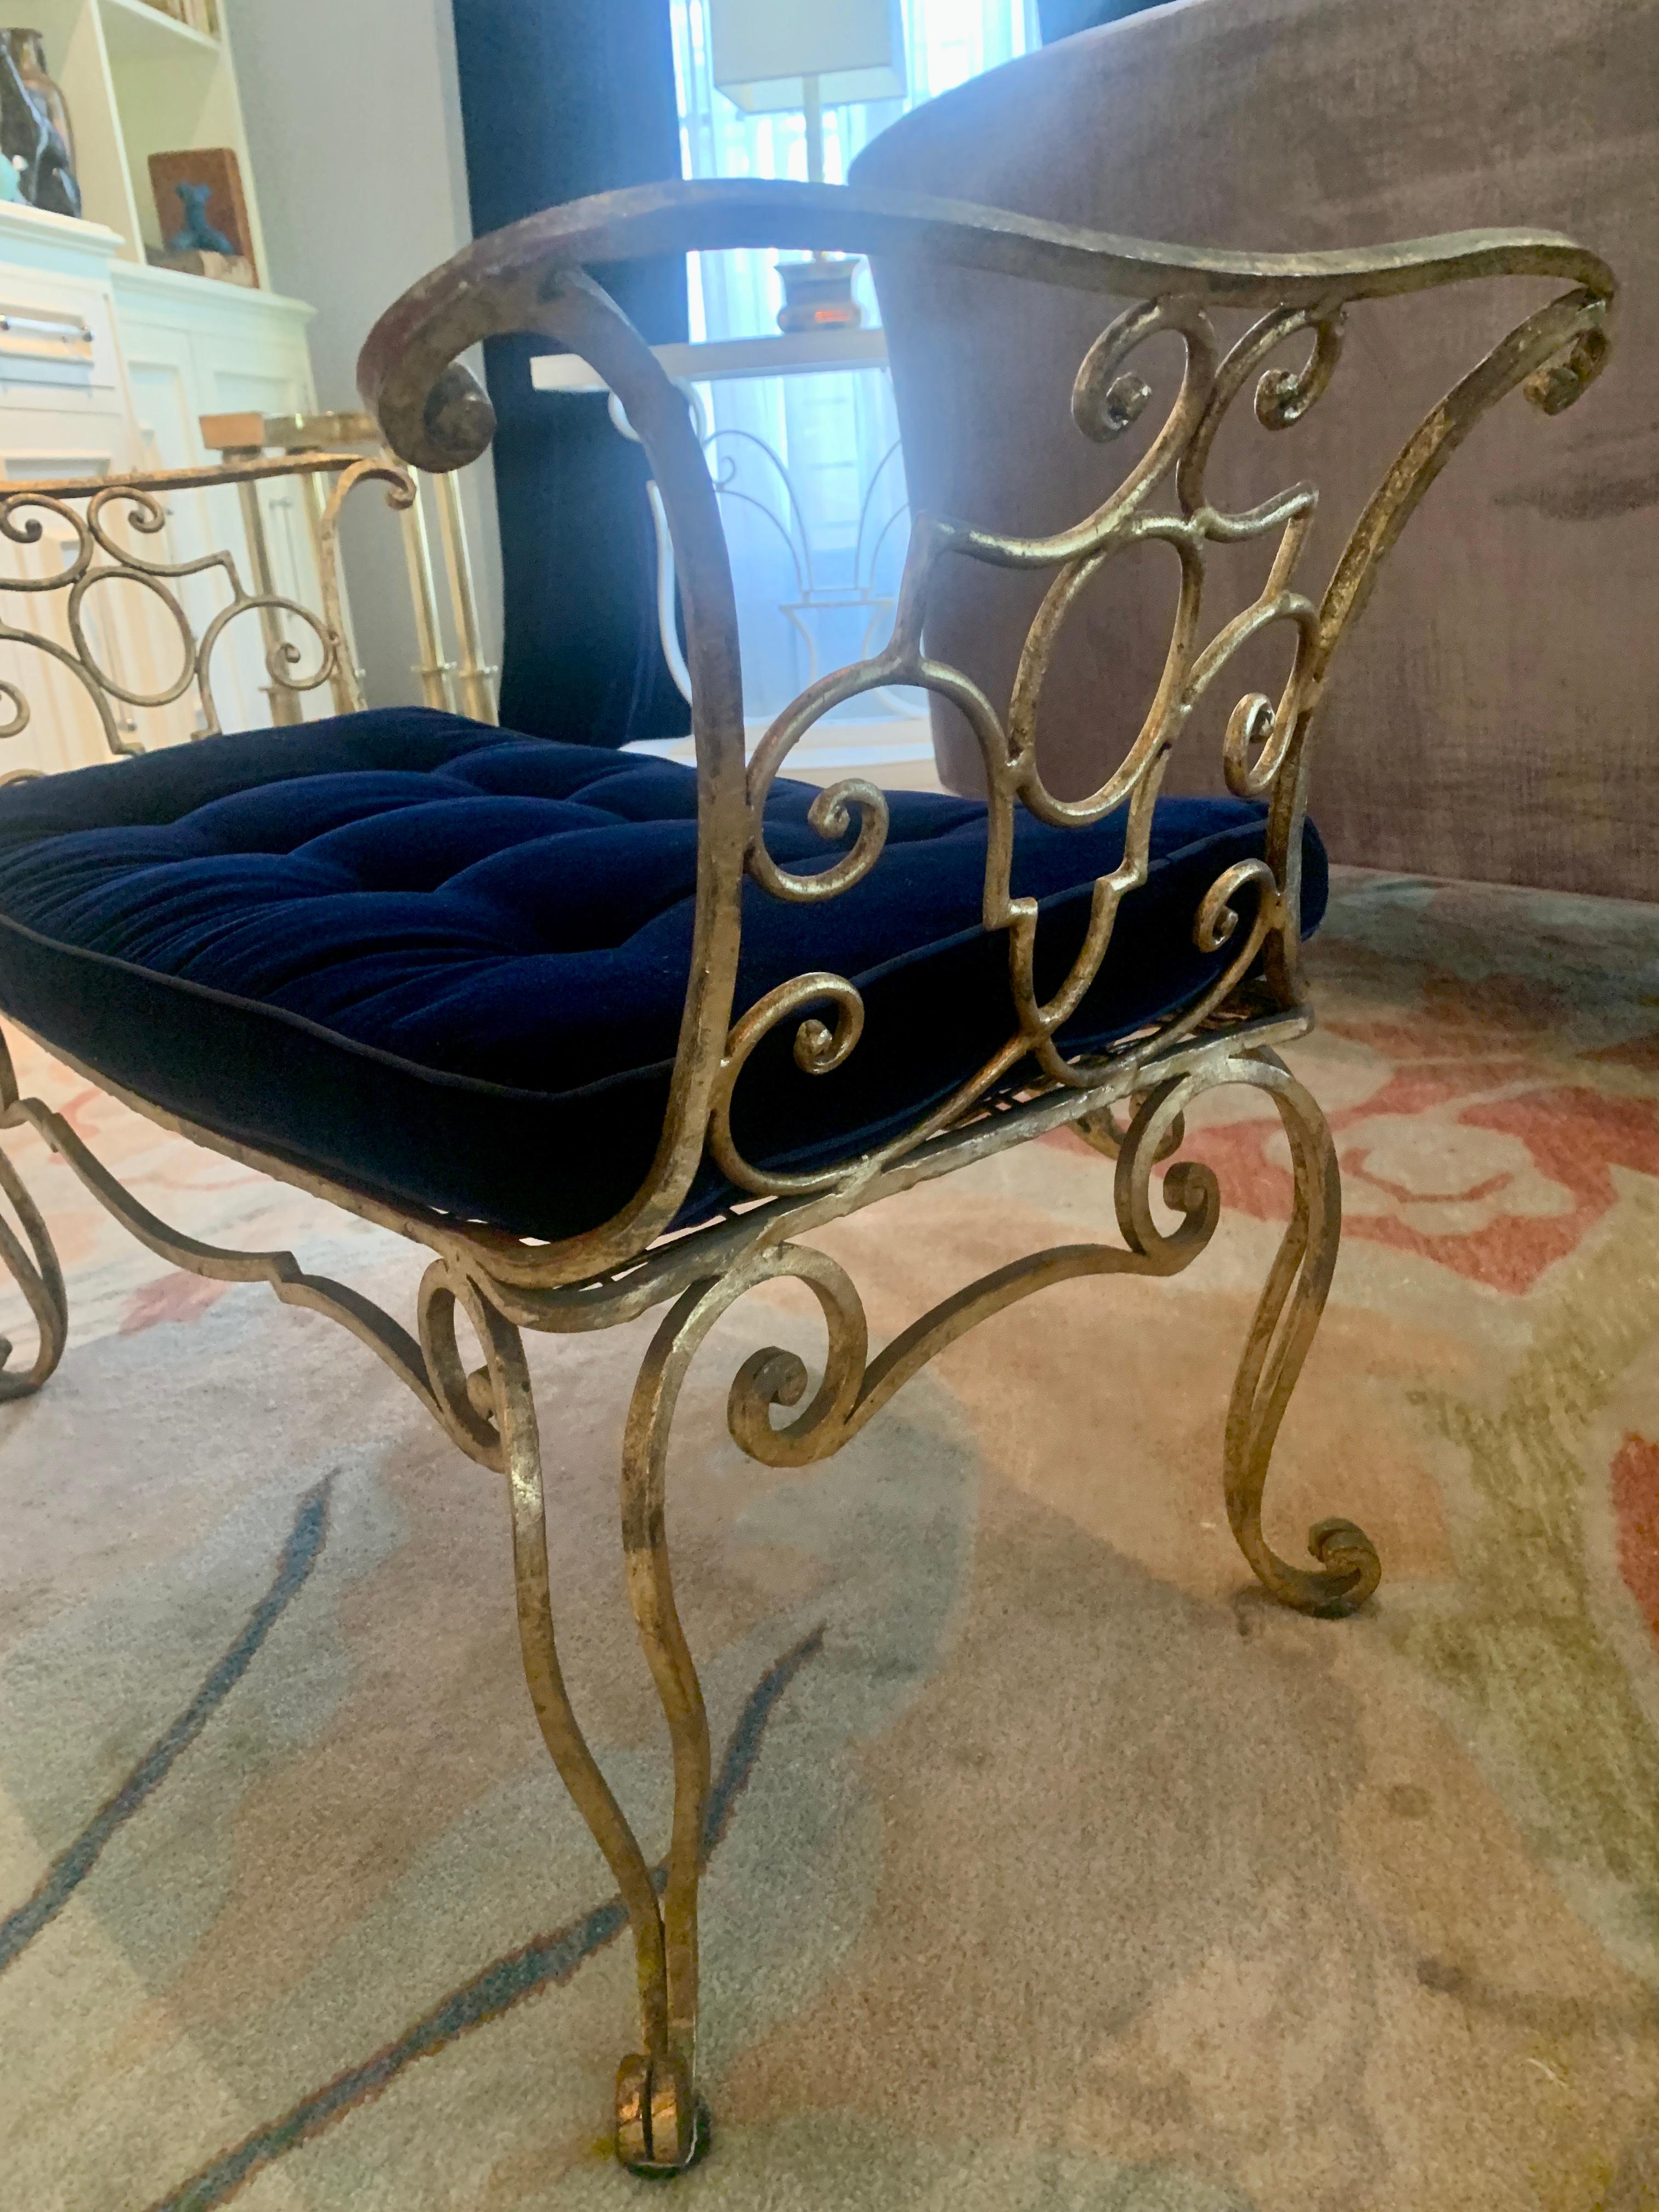 Iconic to intricate wrought iron work, Jean-Charles Moreux is synonymous with the use of hand wrought iron in an elegant and sophisticated twist. The pair of benches are a wonderful compliment to flank a pair of doors or to oppose one another in a